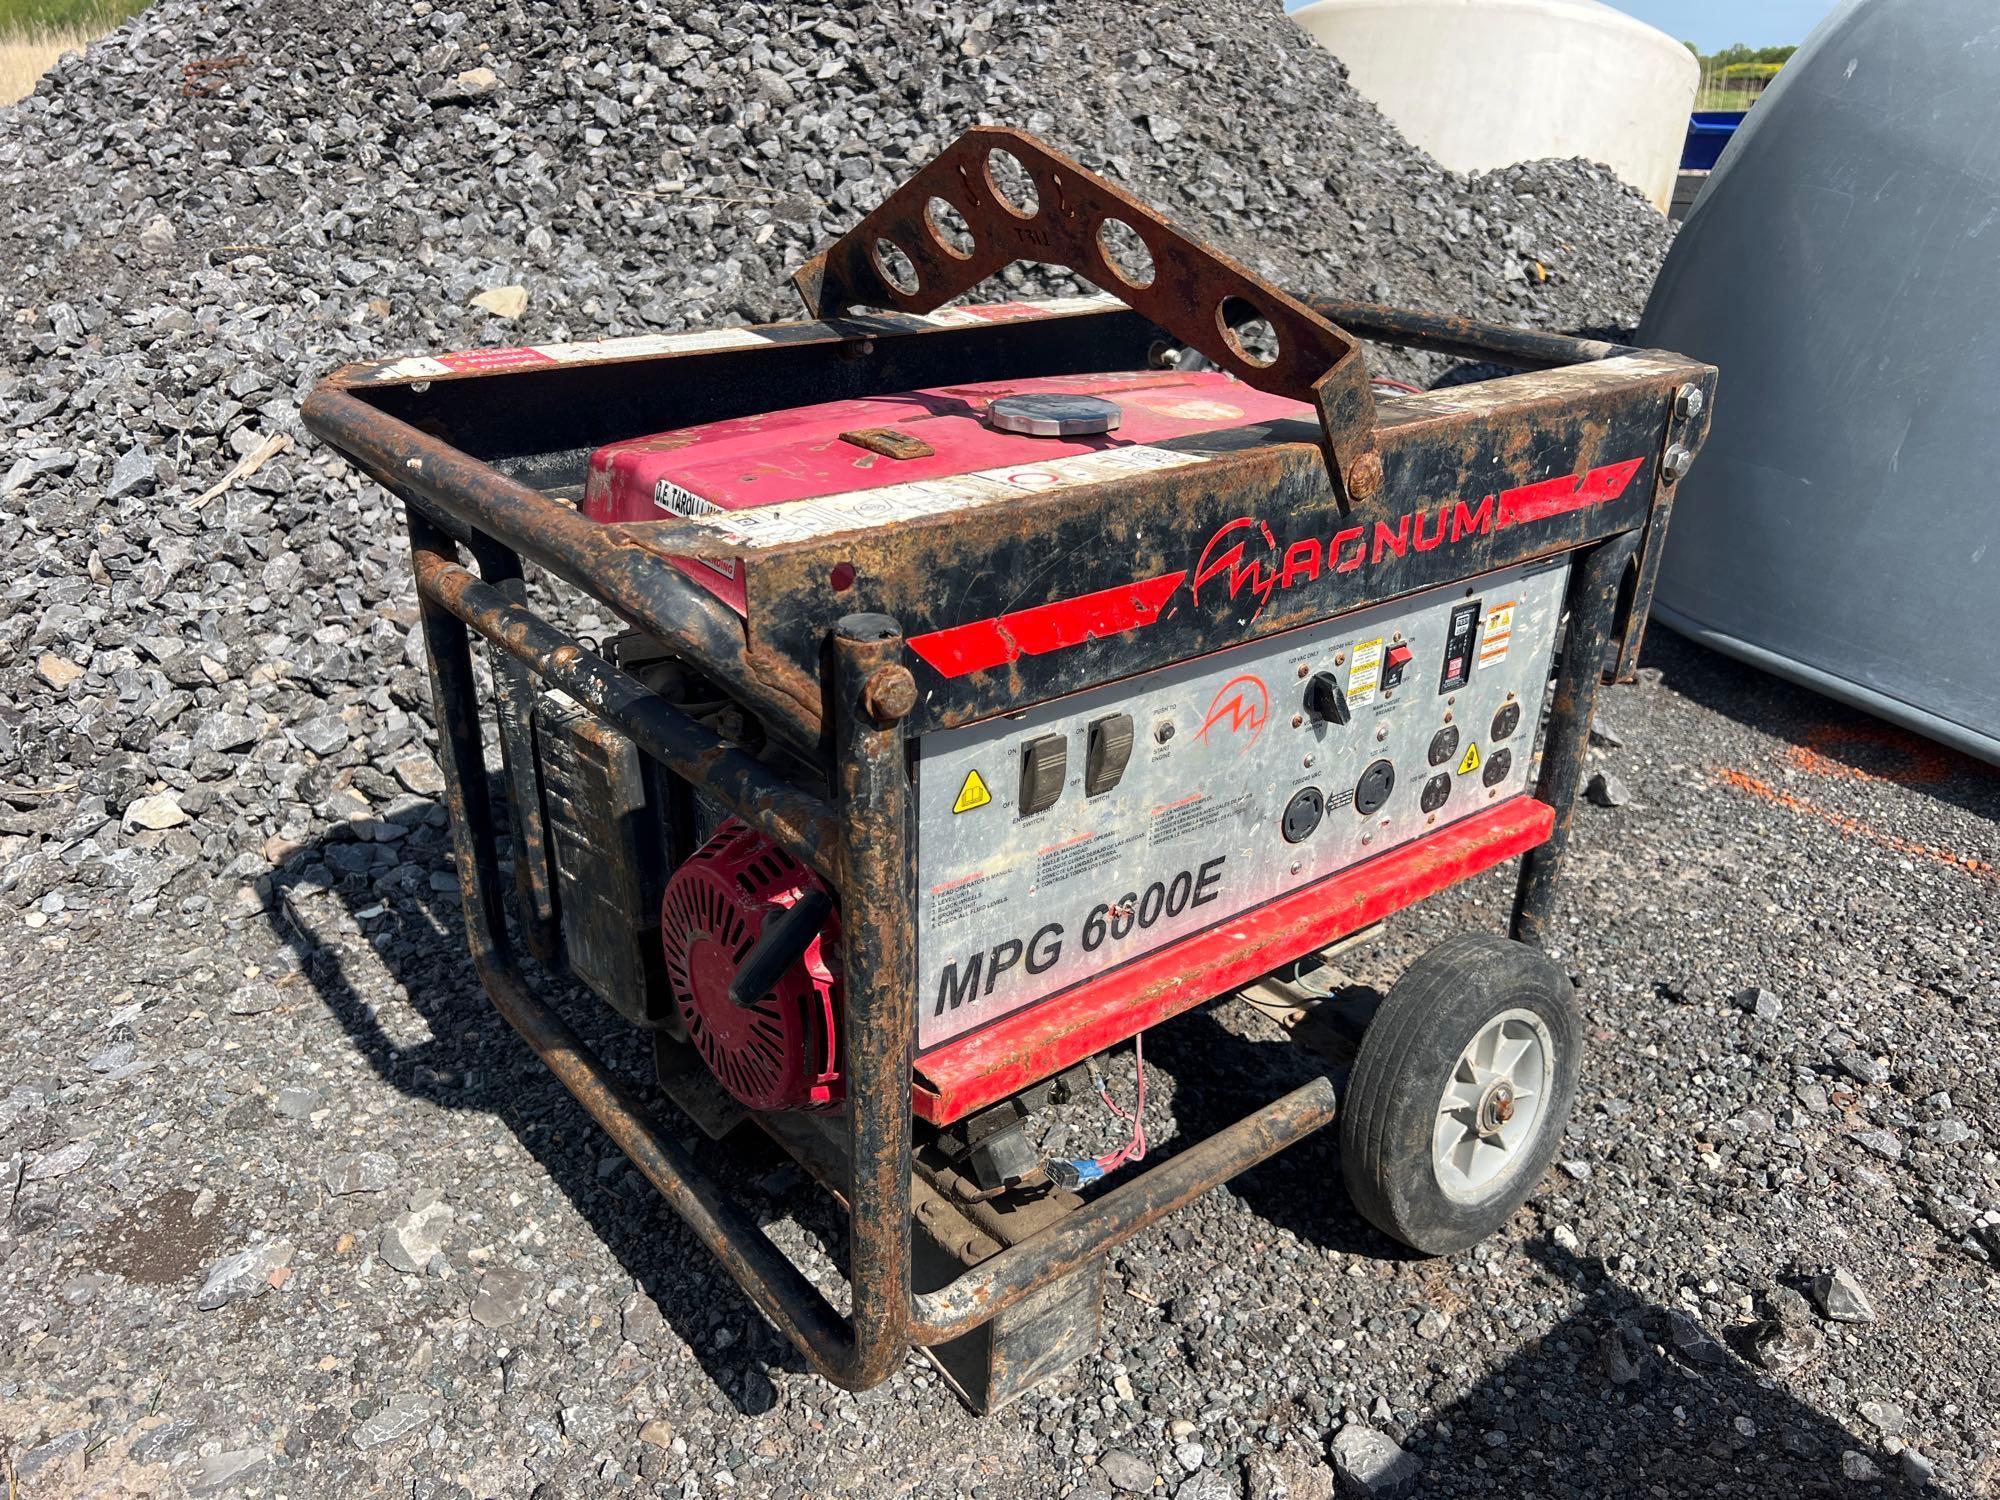 MAGNUM MPG 6600E GENERATOR SUPPORT EQUIPMENT powered by gas engine, wheel kit.